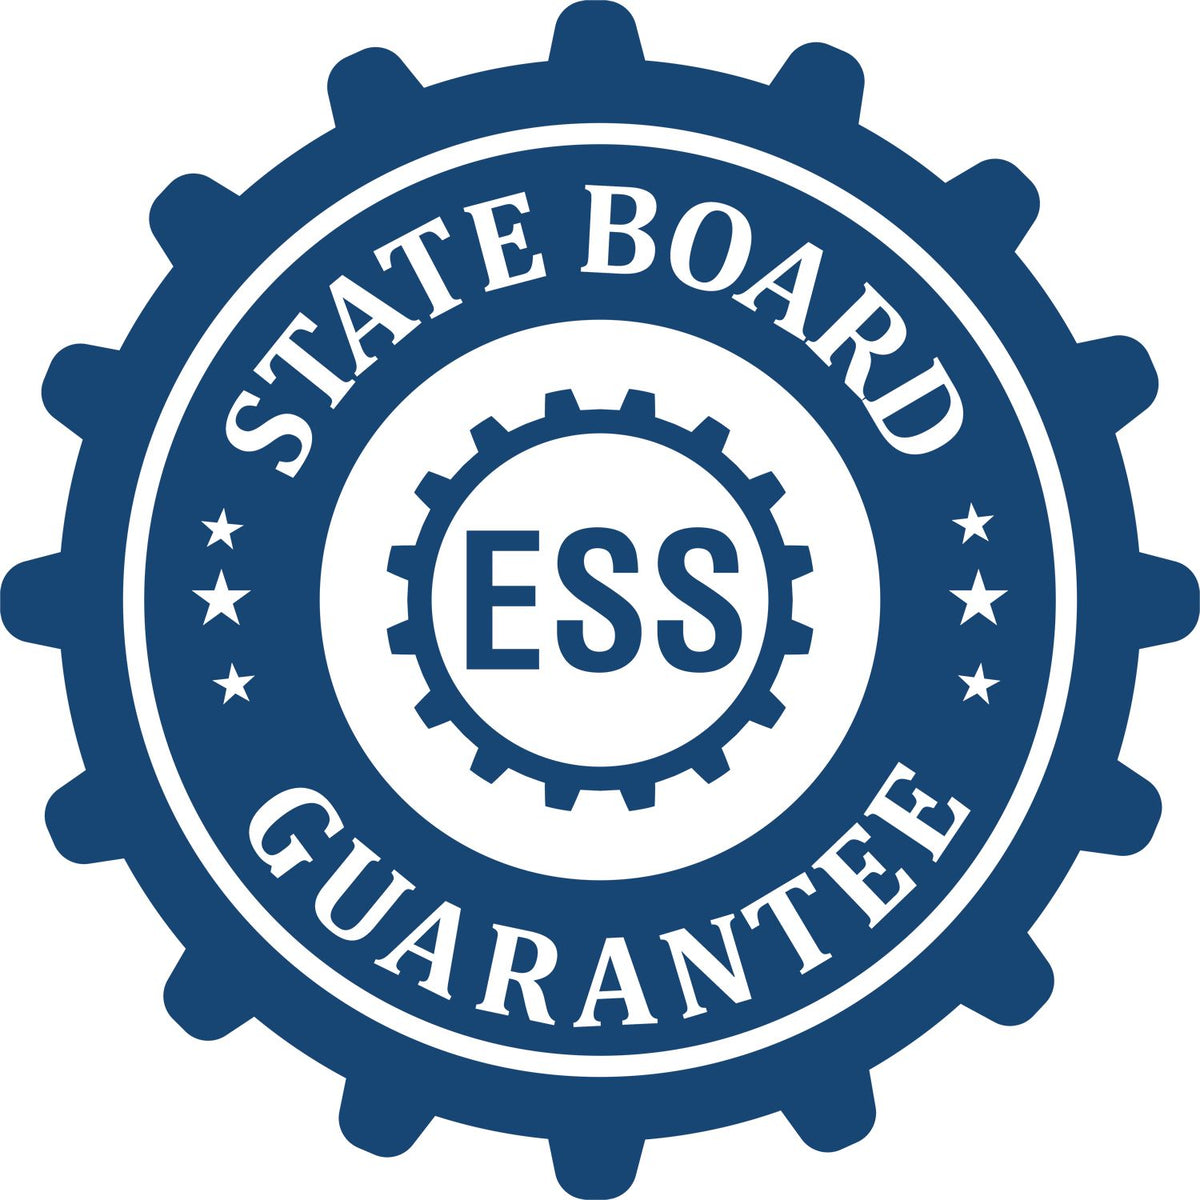 An emblem in a gear shape illustrating a state board guarantee for the Washington Professional Engineer Seal Stamp product.